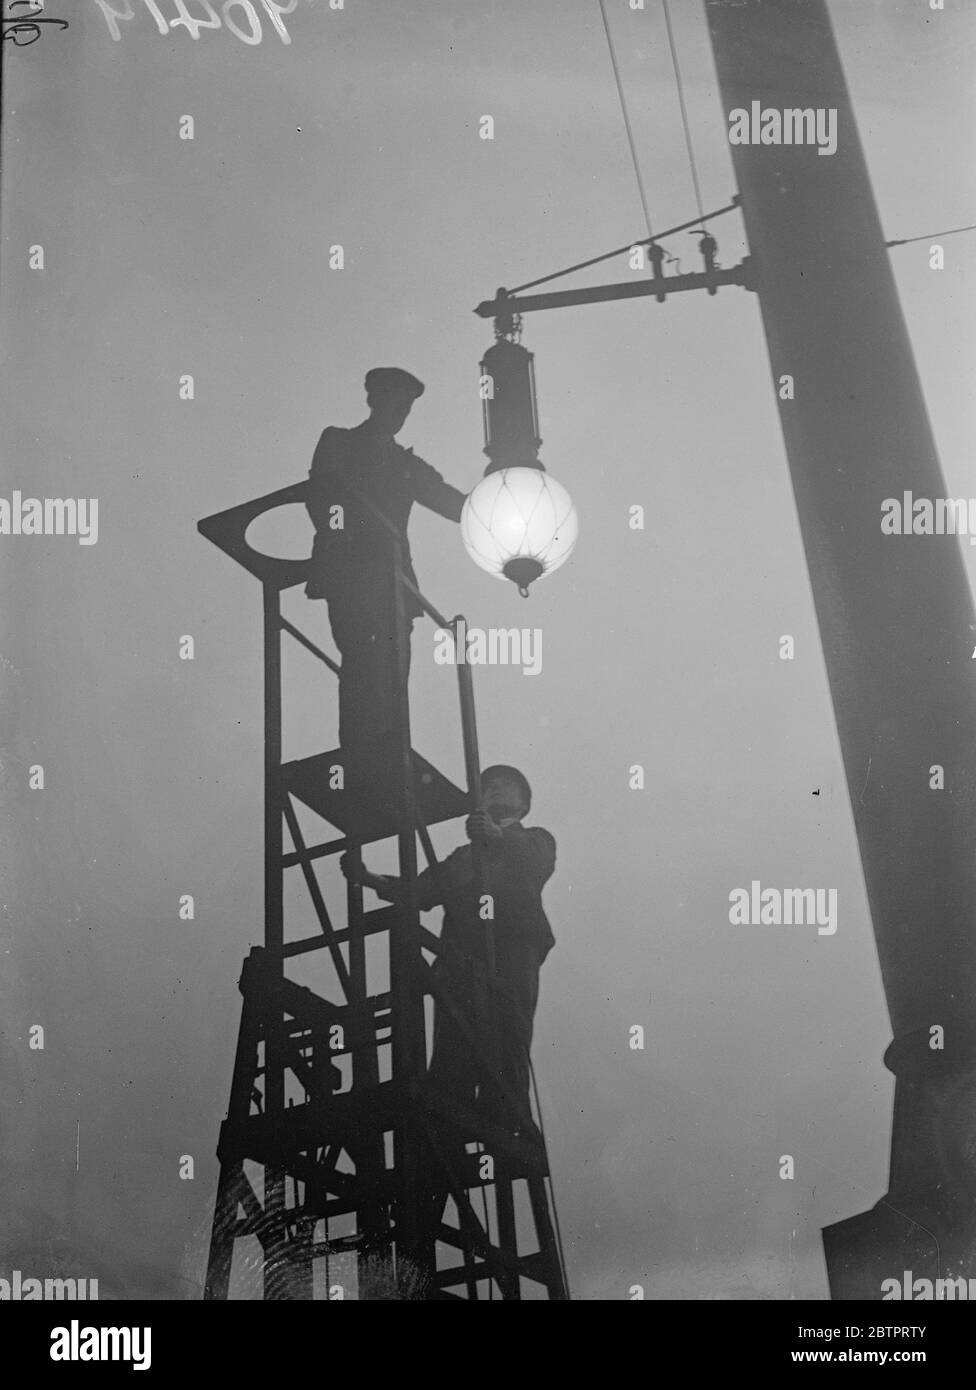 Fog slows down, London. Thousands of Londoners were held up on their way to work by the thick white fog which to lay transport services. Photo shows, workmen silhouetted as they attended a lamp in the foggy gloom at Liverpool Street station. 18 October 1937 Stock Photo